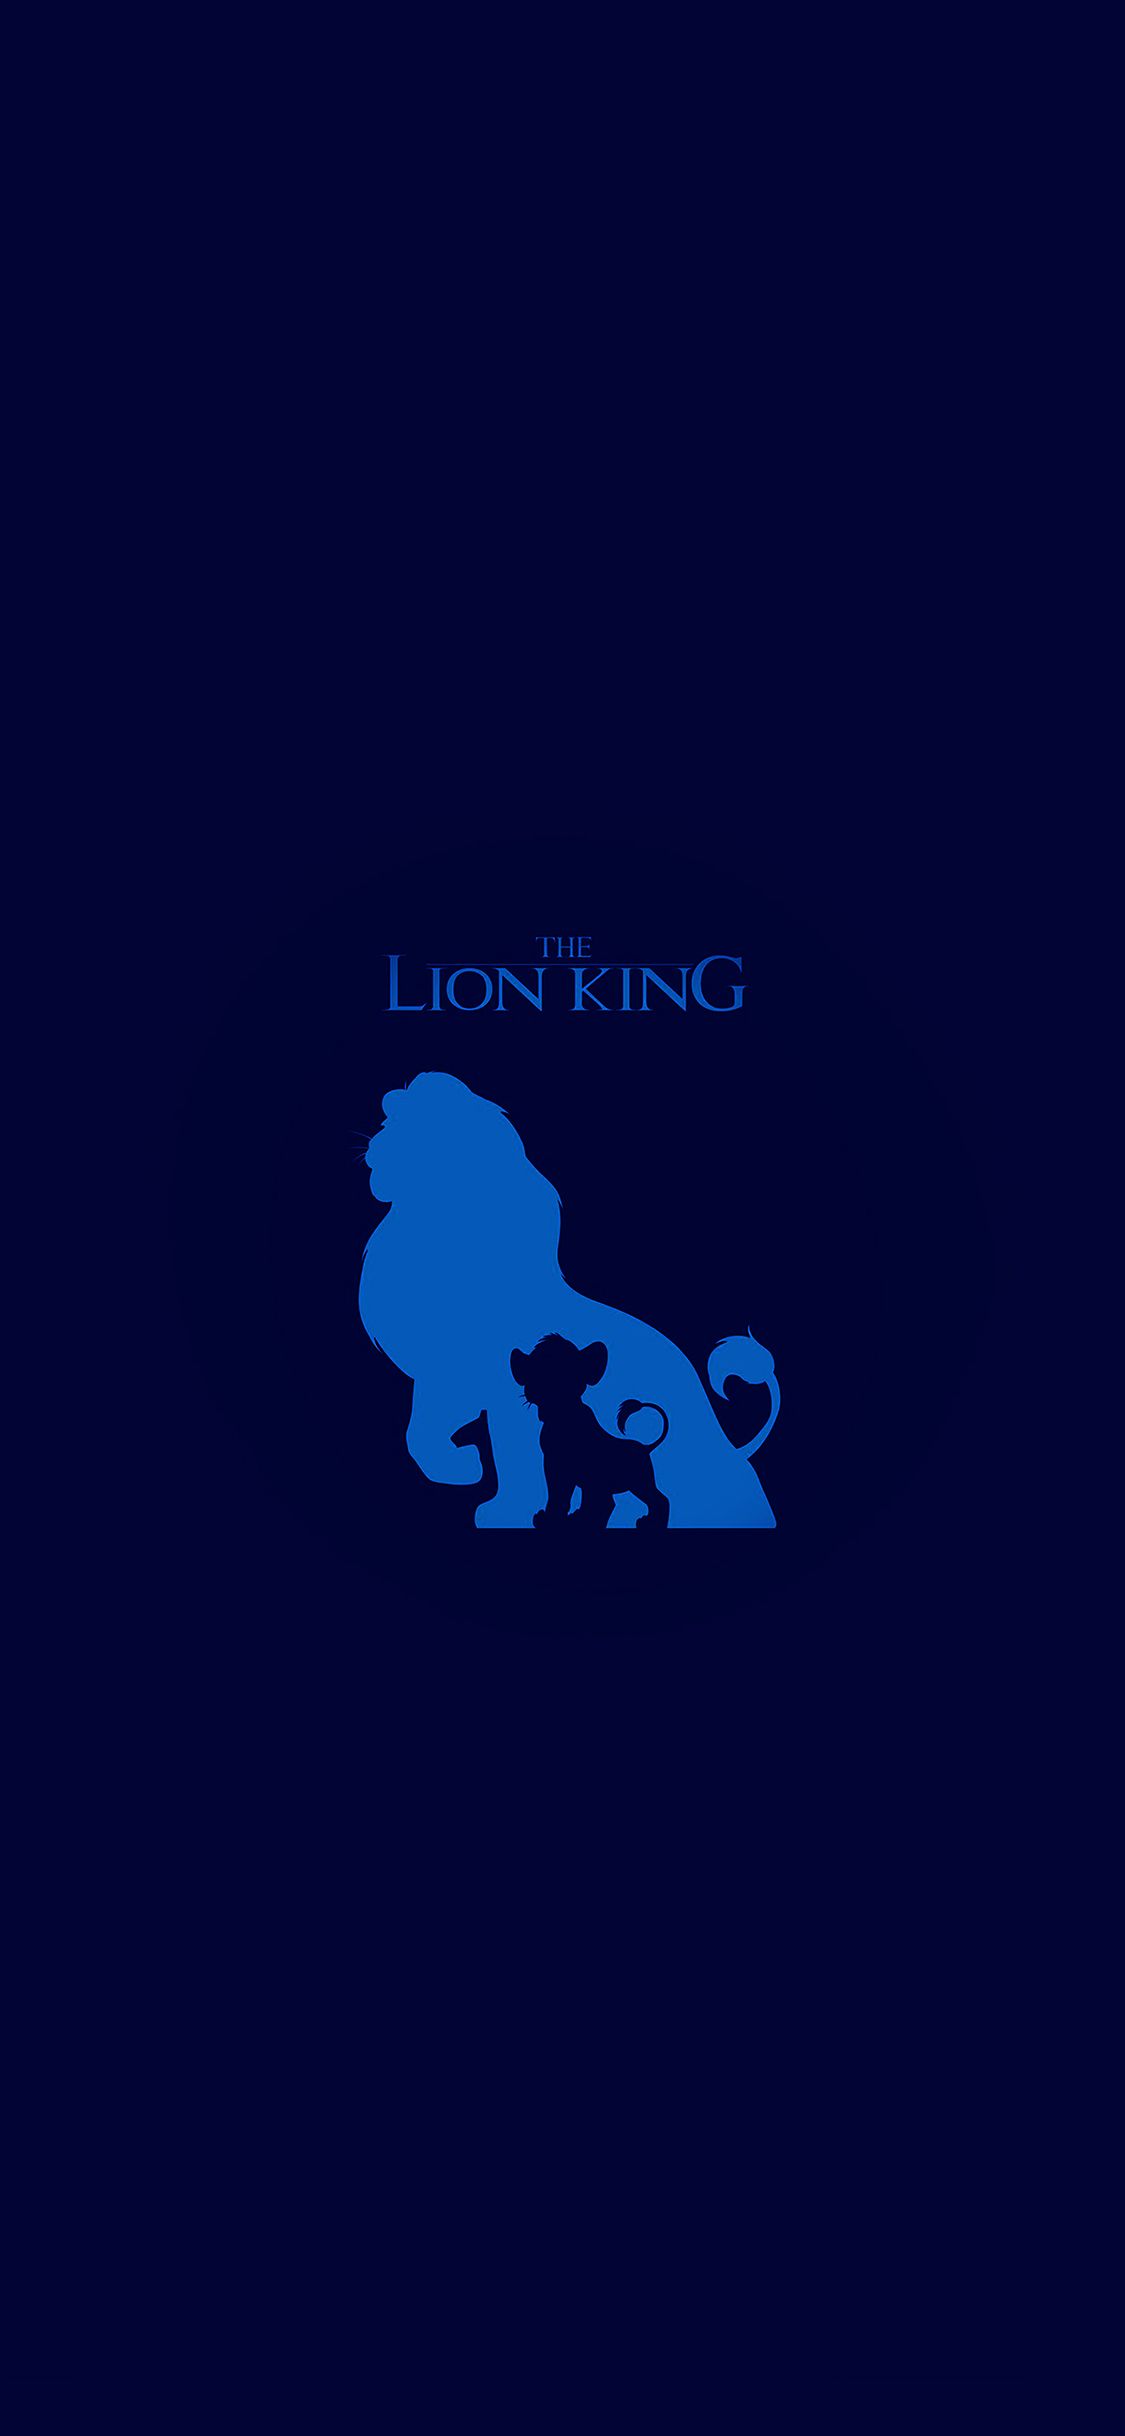 The lion king logo on a dark background - The Lion King